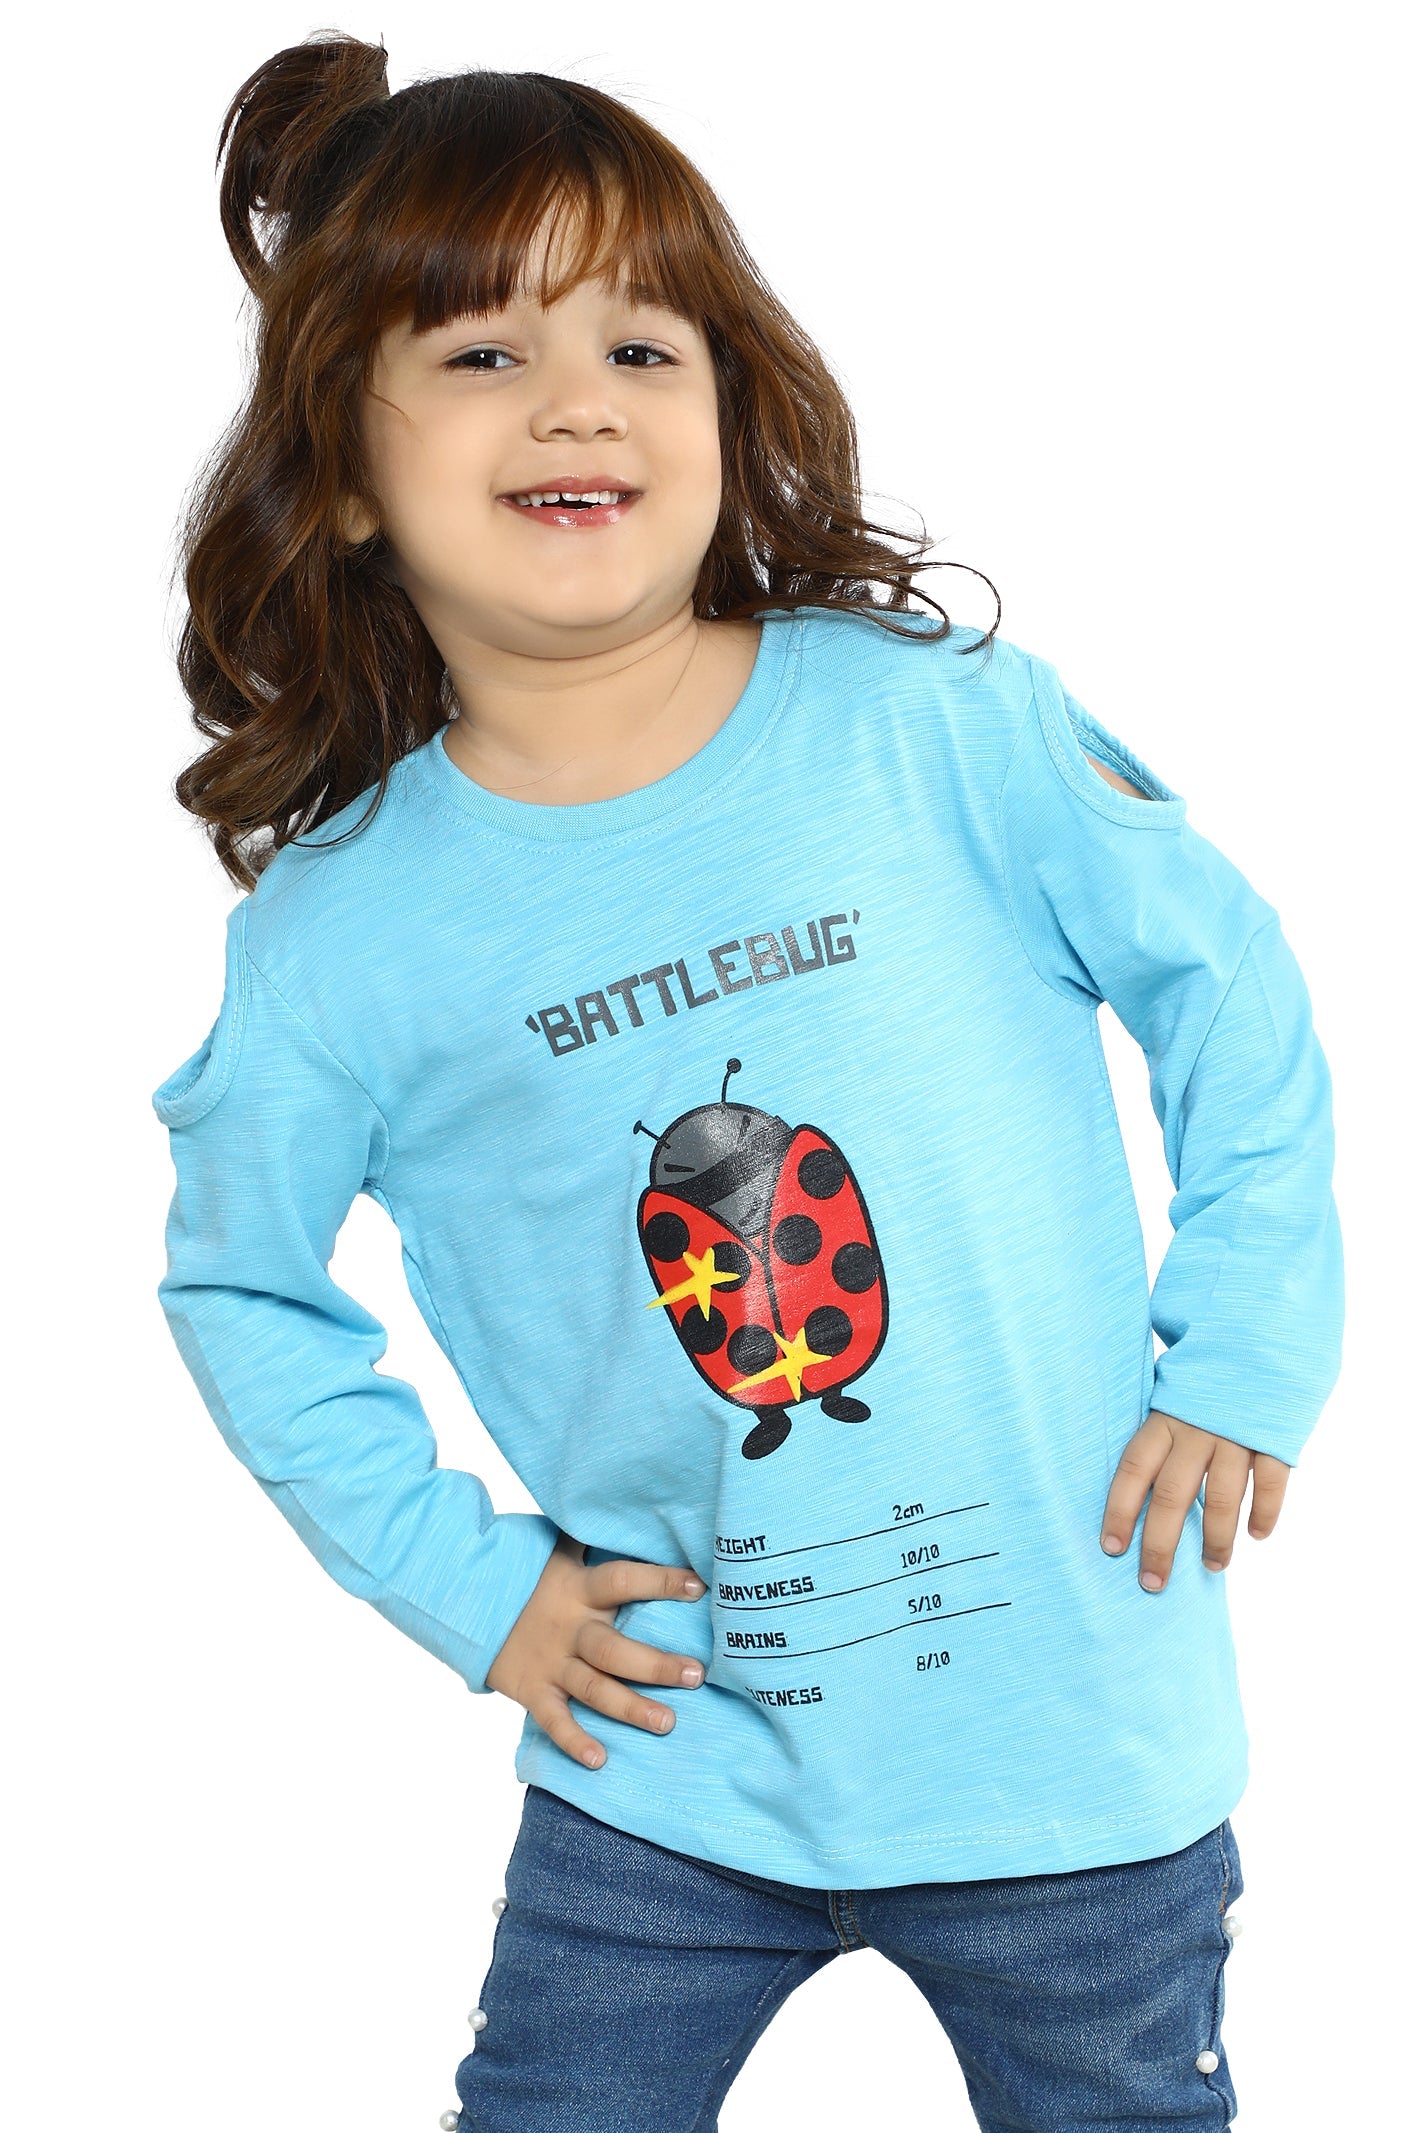 Girls T-Shirt In Turquoise SKU: KGA-0229-TURQUOISE - Diners